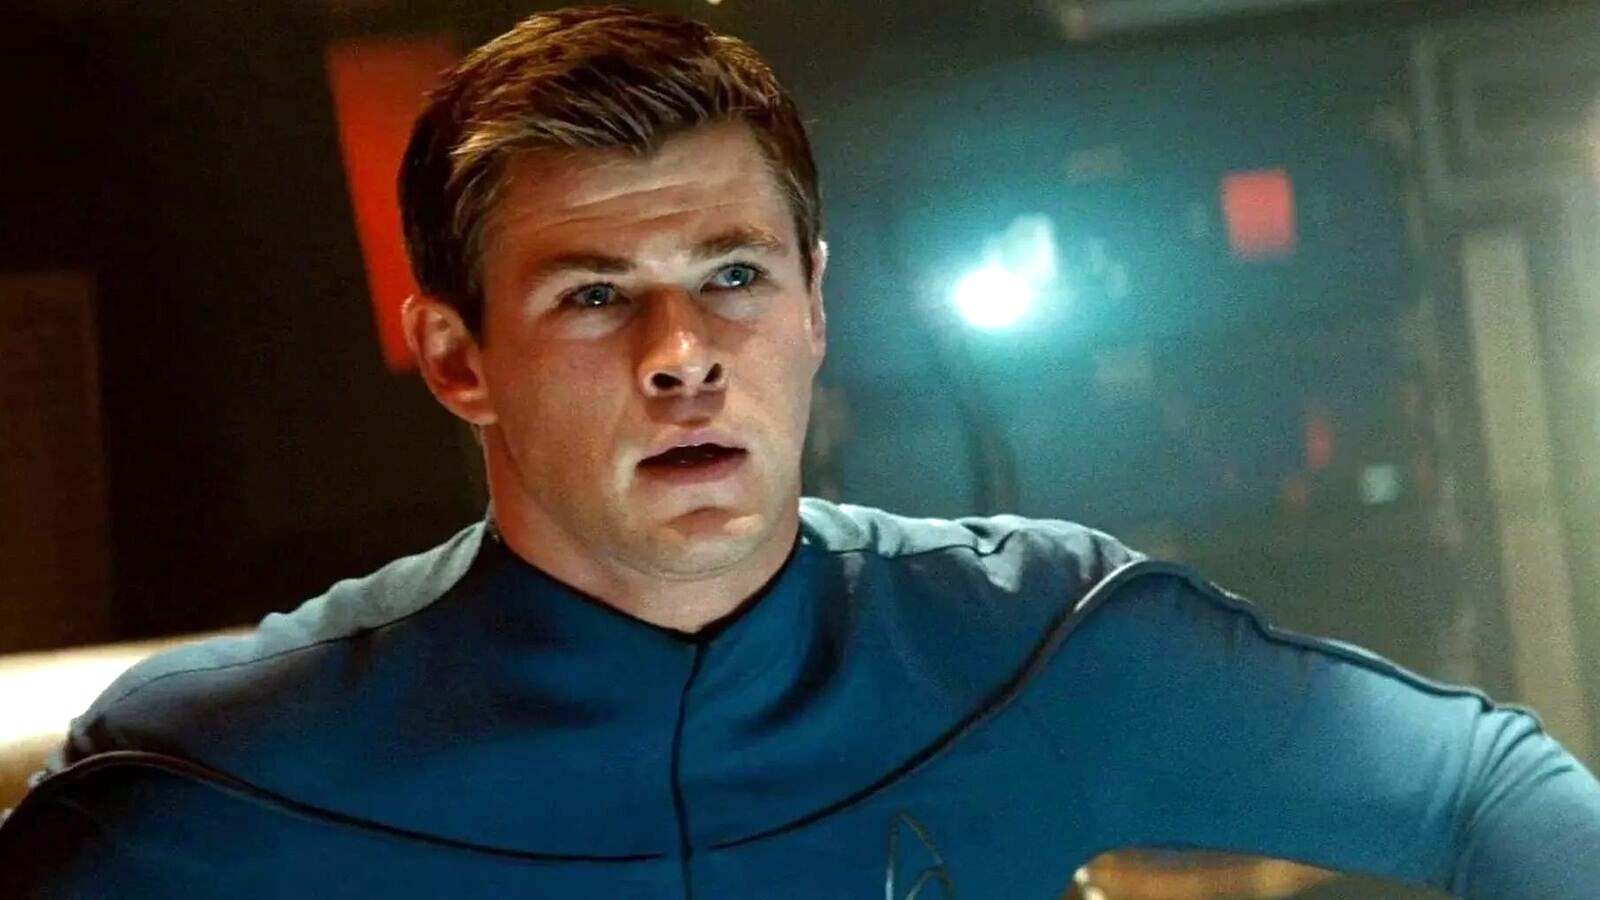 Latest Sci-Fi News: Chris Hemsworth reveals the real reason his ‘Star Trek’ return never happened as shocking ‘Doctor Who’ spinoff rumors surface